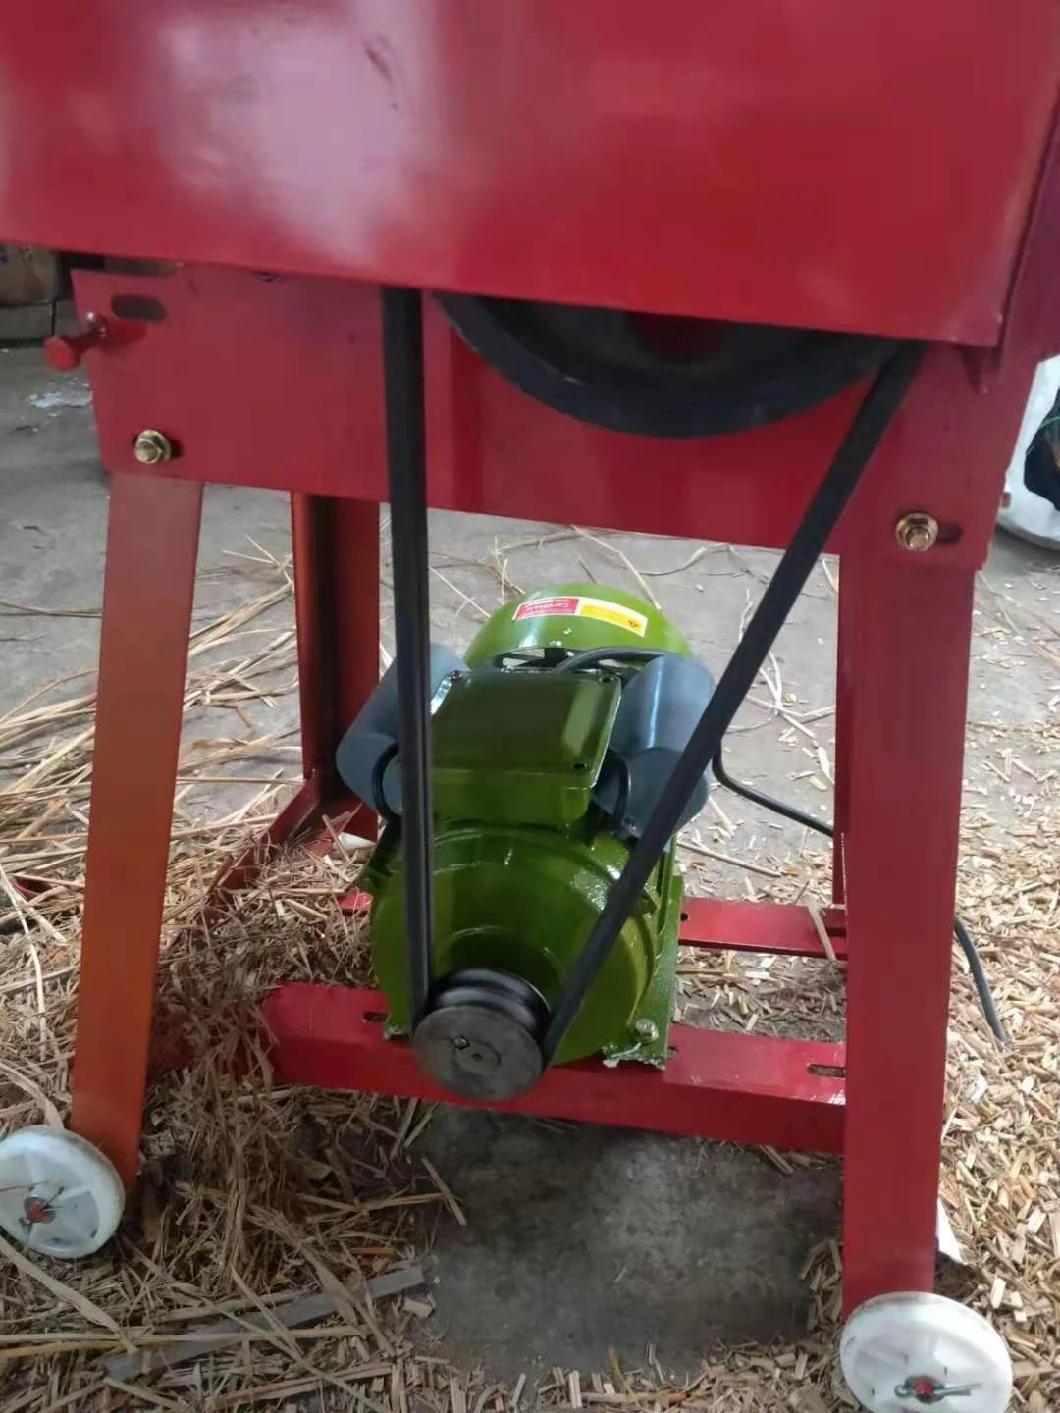 Agricultural Adjustable Cow Grass Machine